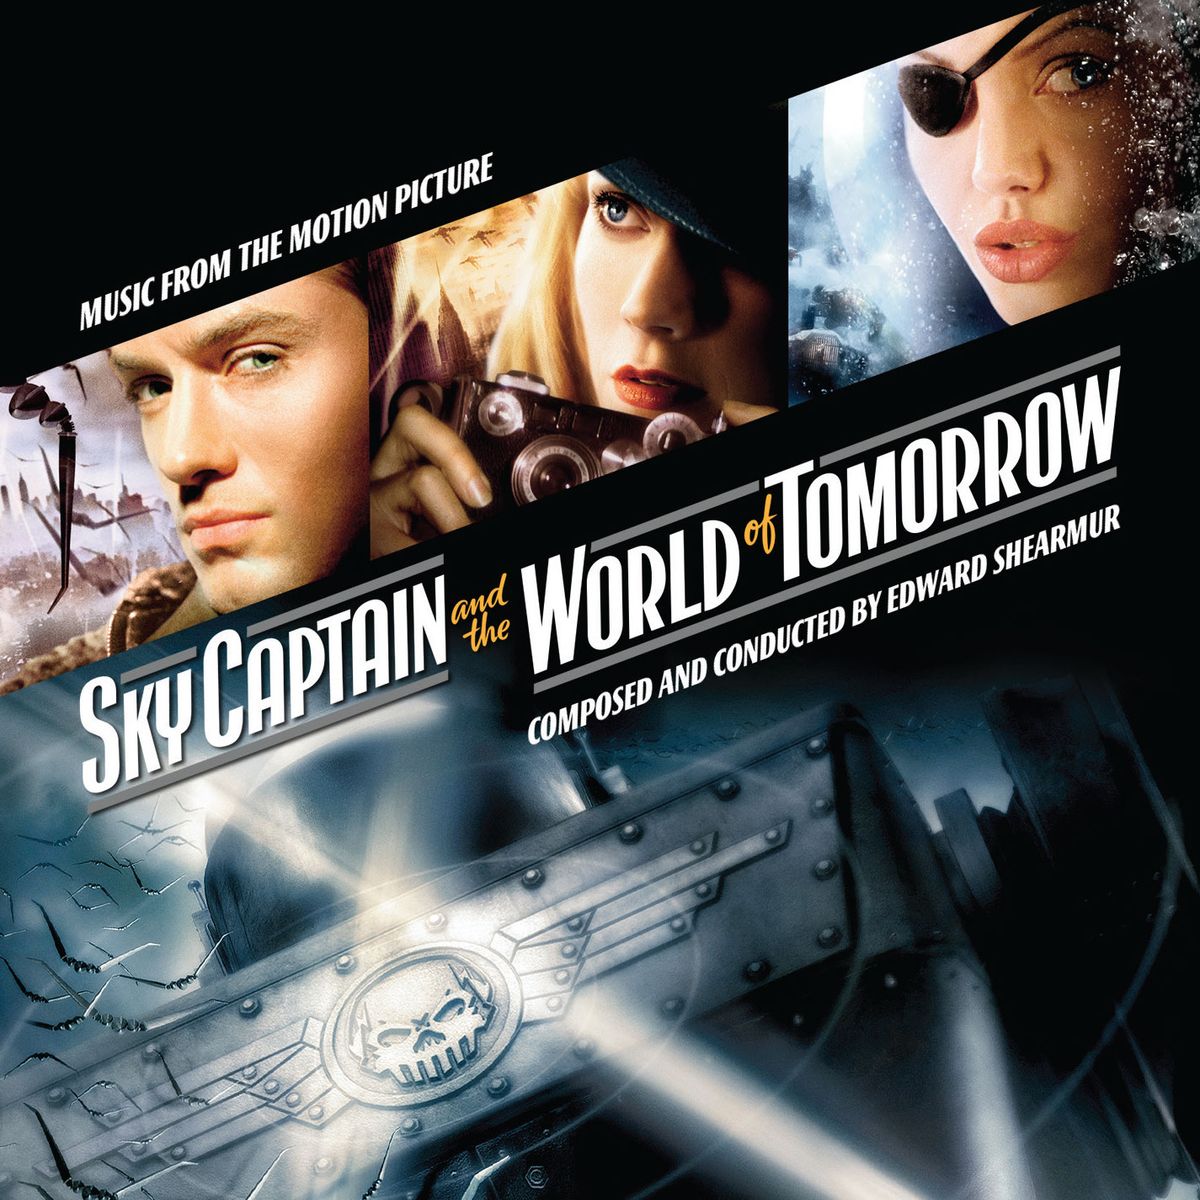 Sky Captain and the World of the Tomorrow: Recreation